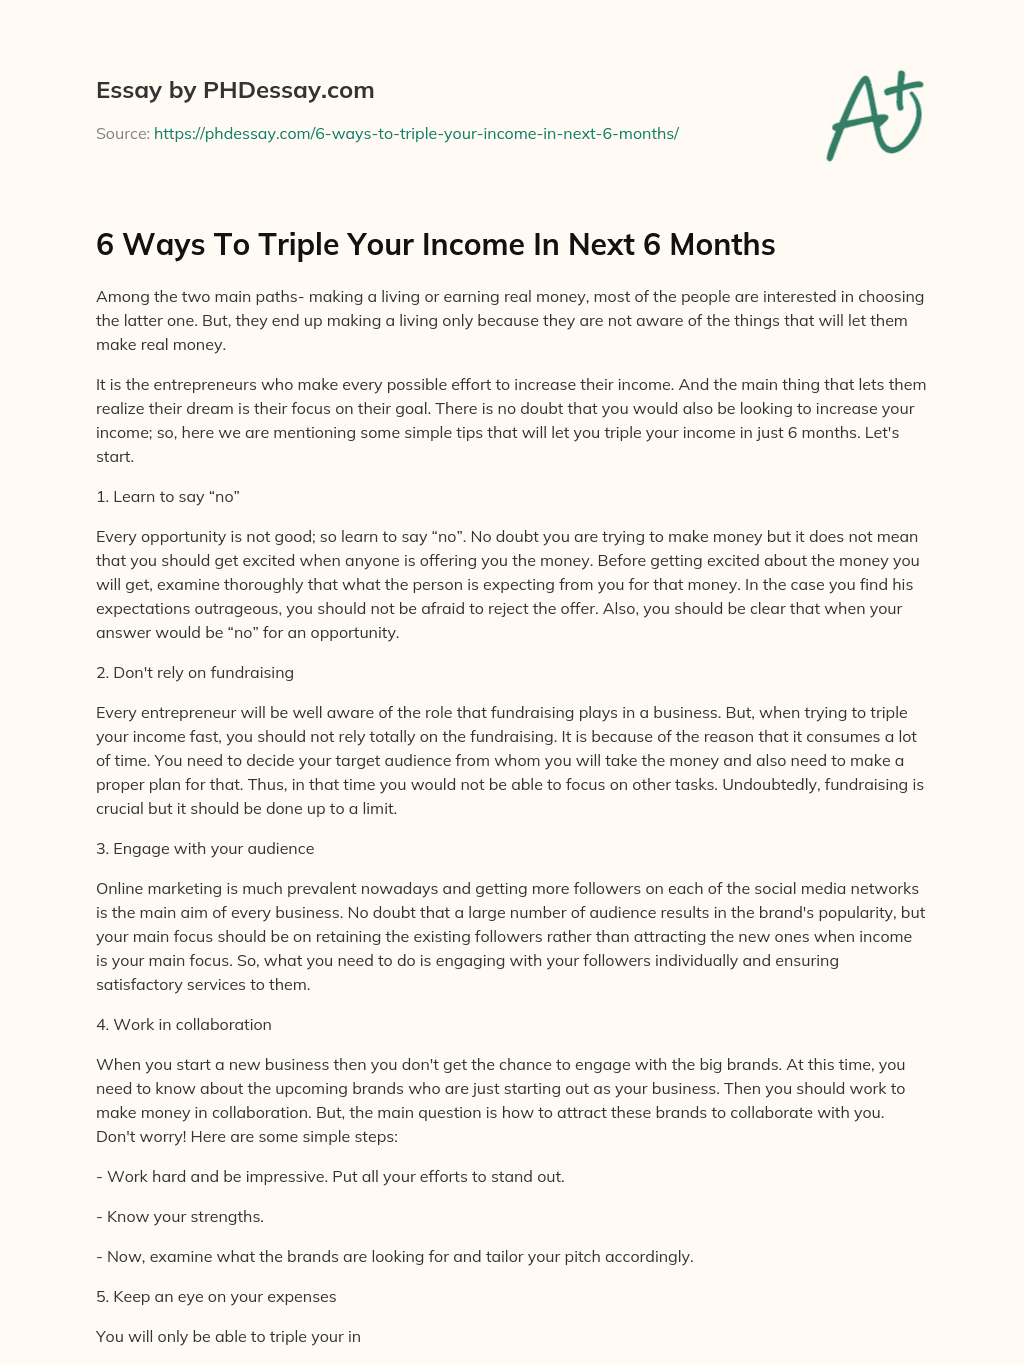 6 Ways To Triple Your Income In Next 6 Months essay